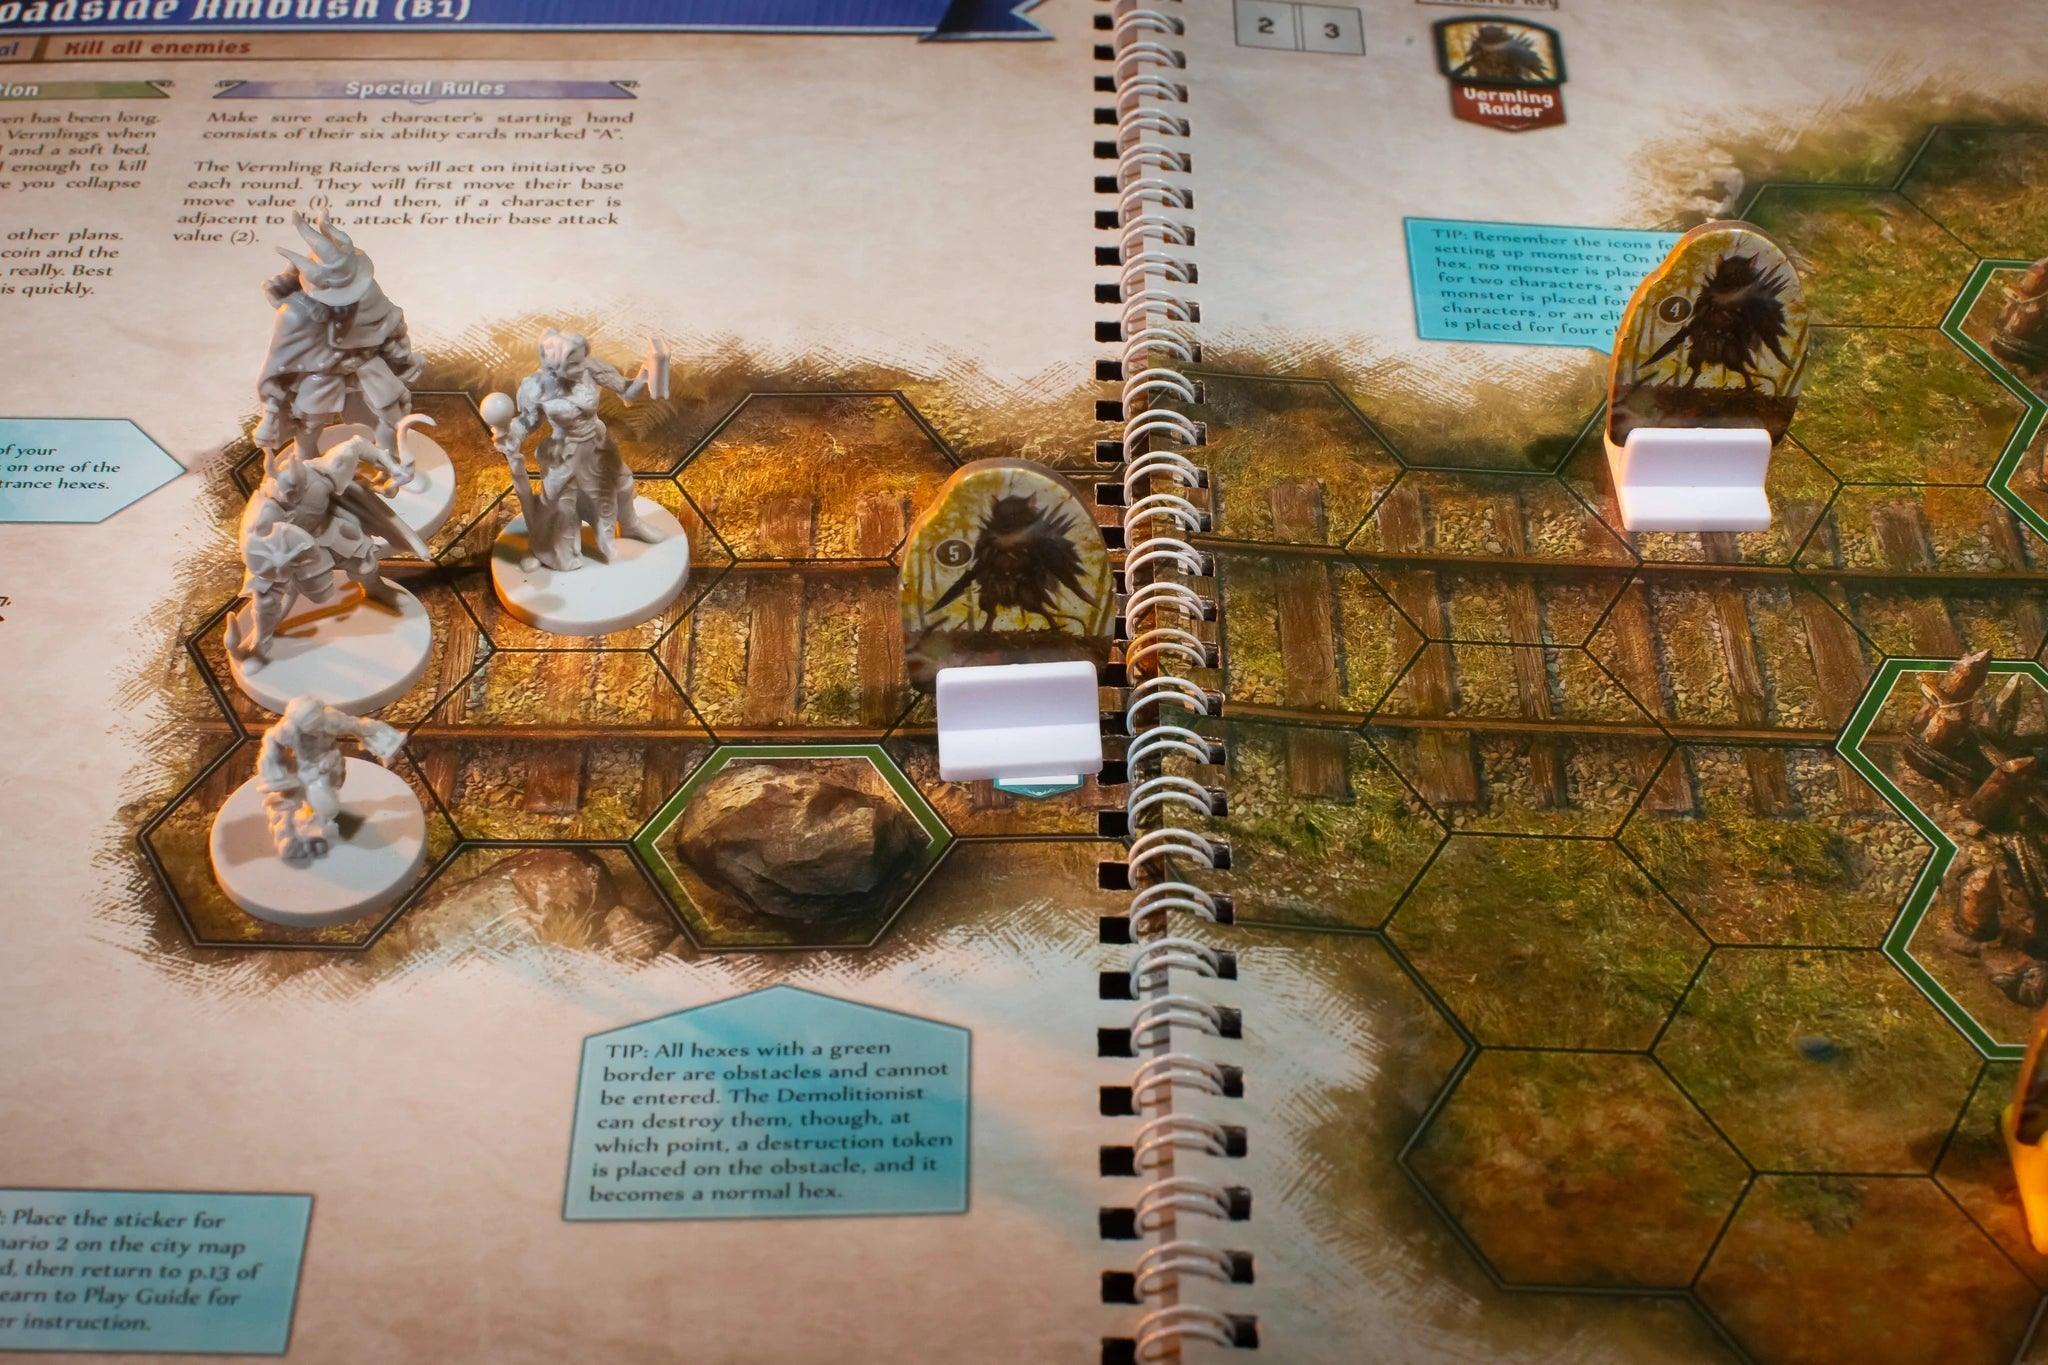 Gloomhaven: Jaws of the Lion - Gaming Library